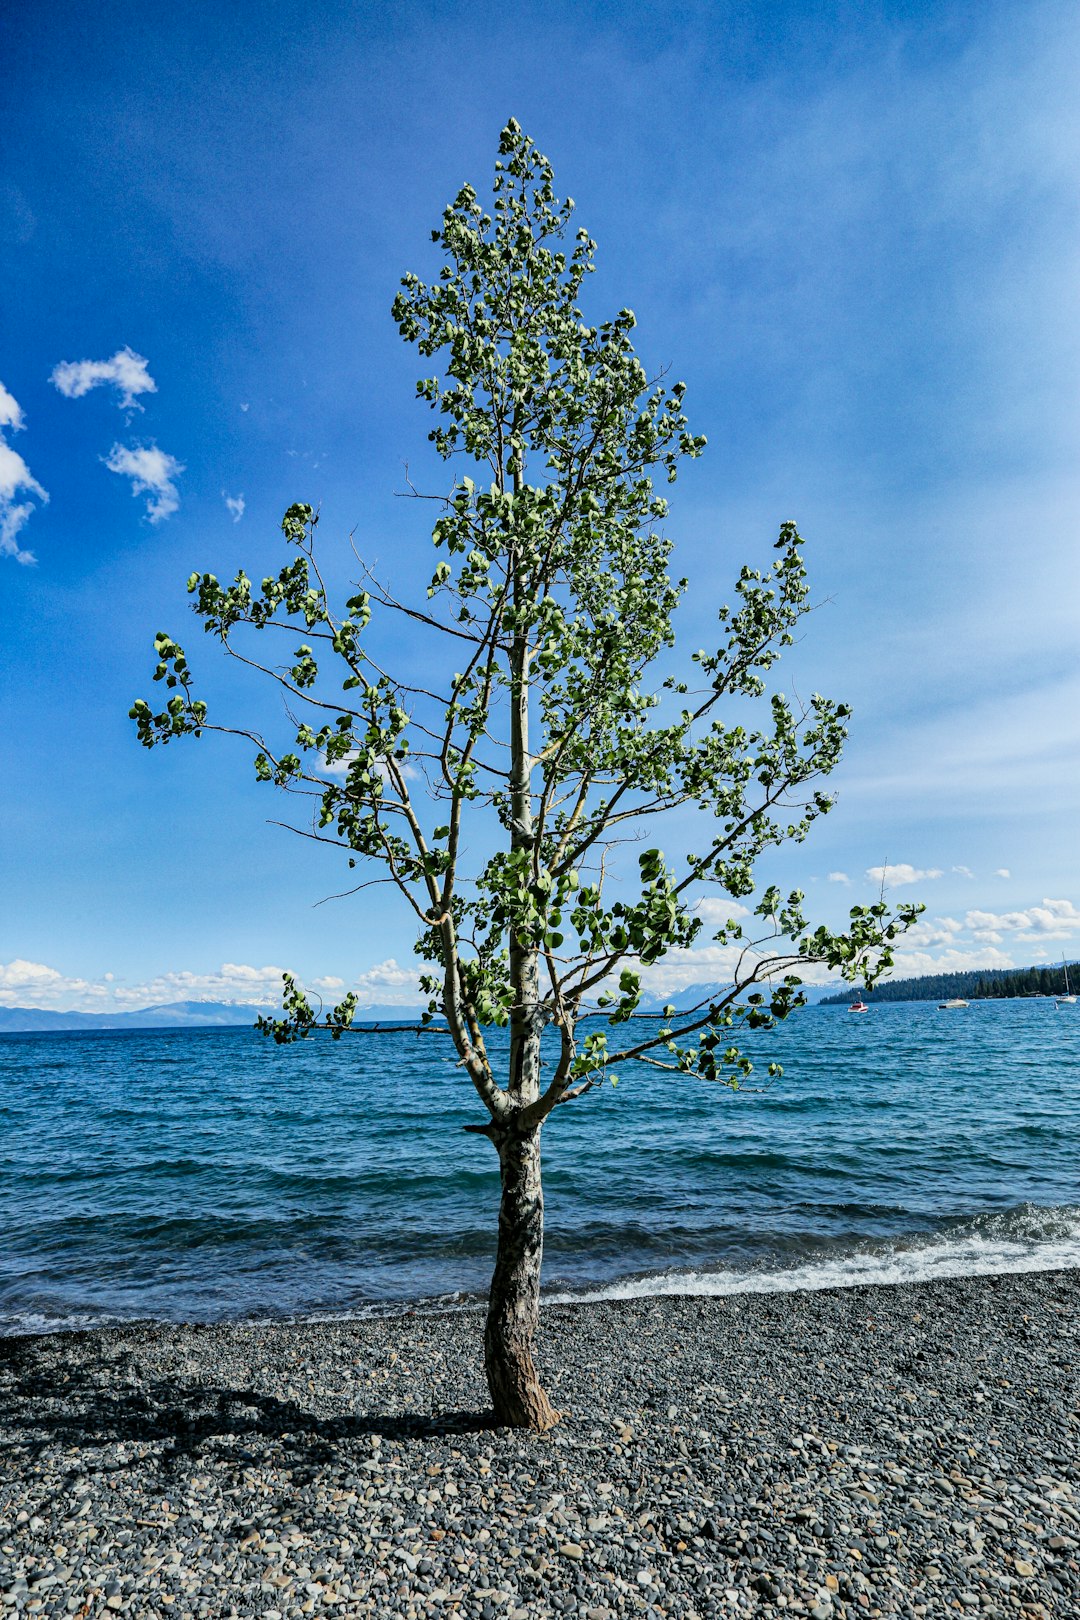 green tree near body of water during daytime